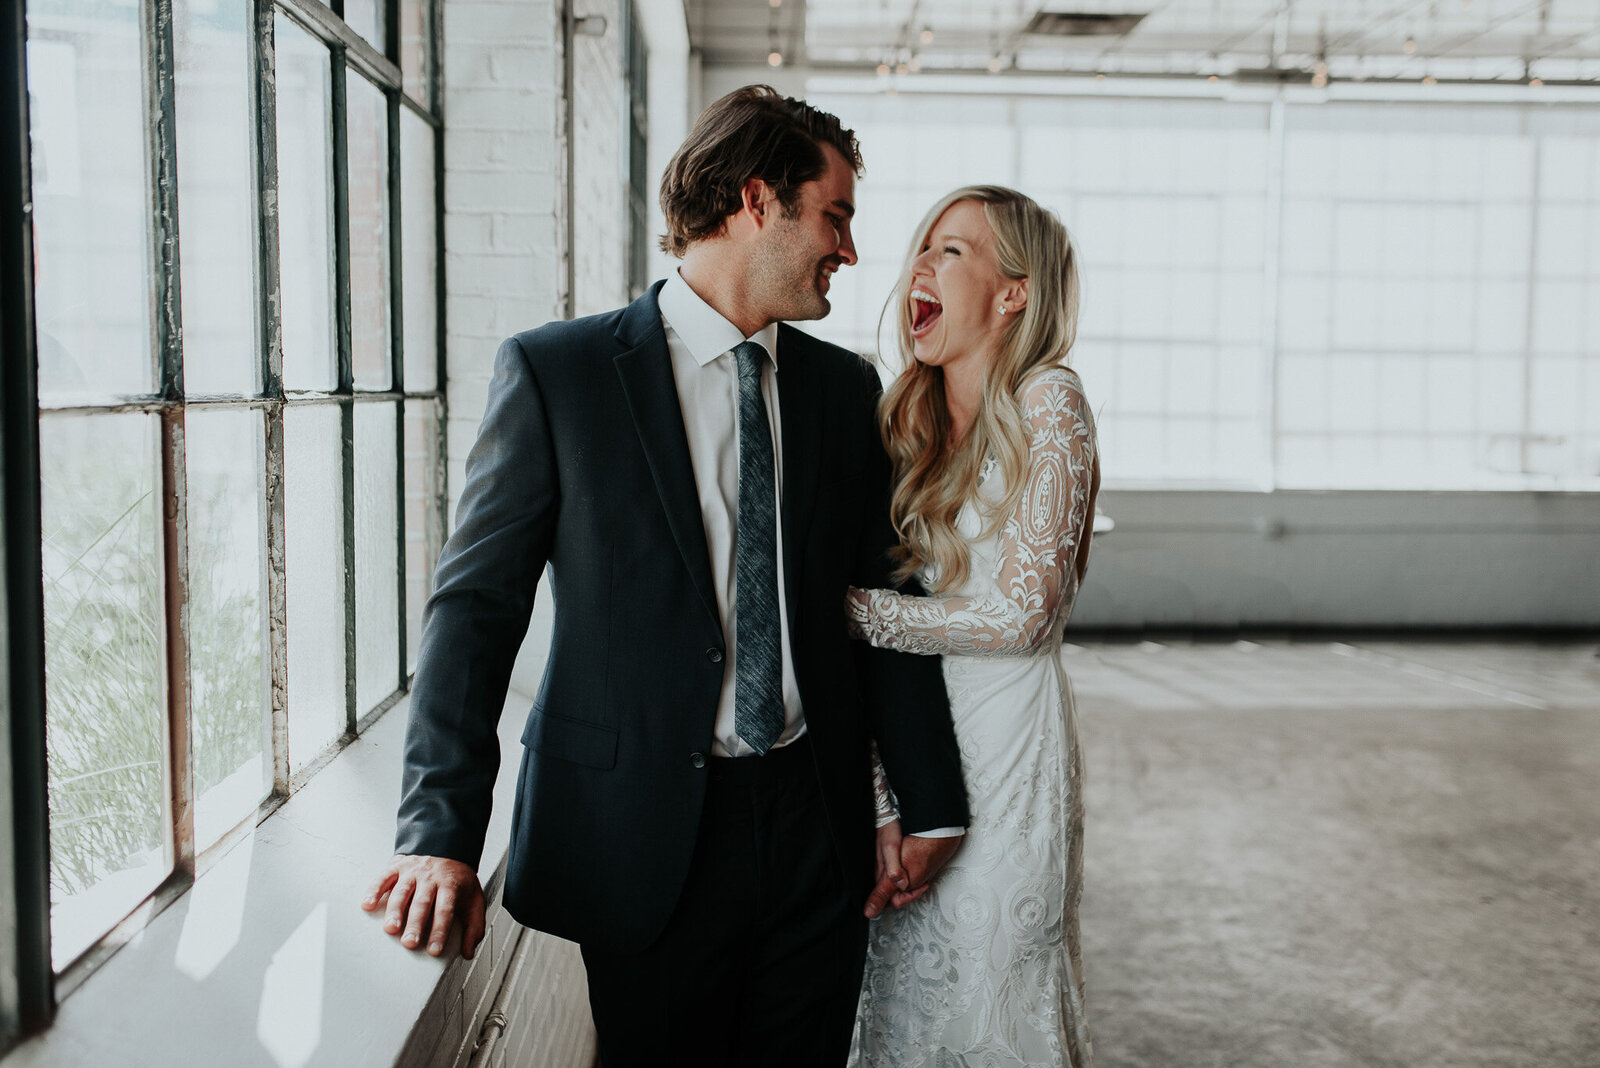 great candid photo of laughing bride with her groom urban setting in colorado